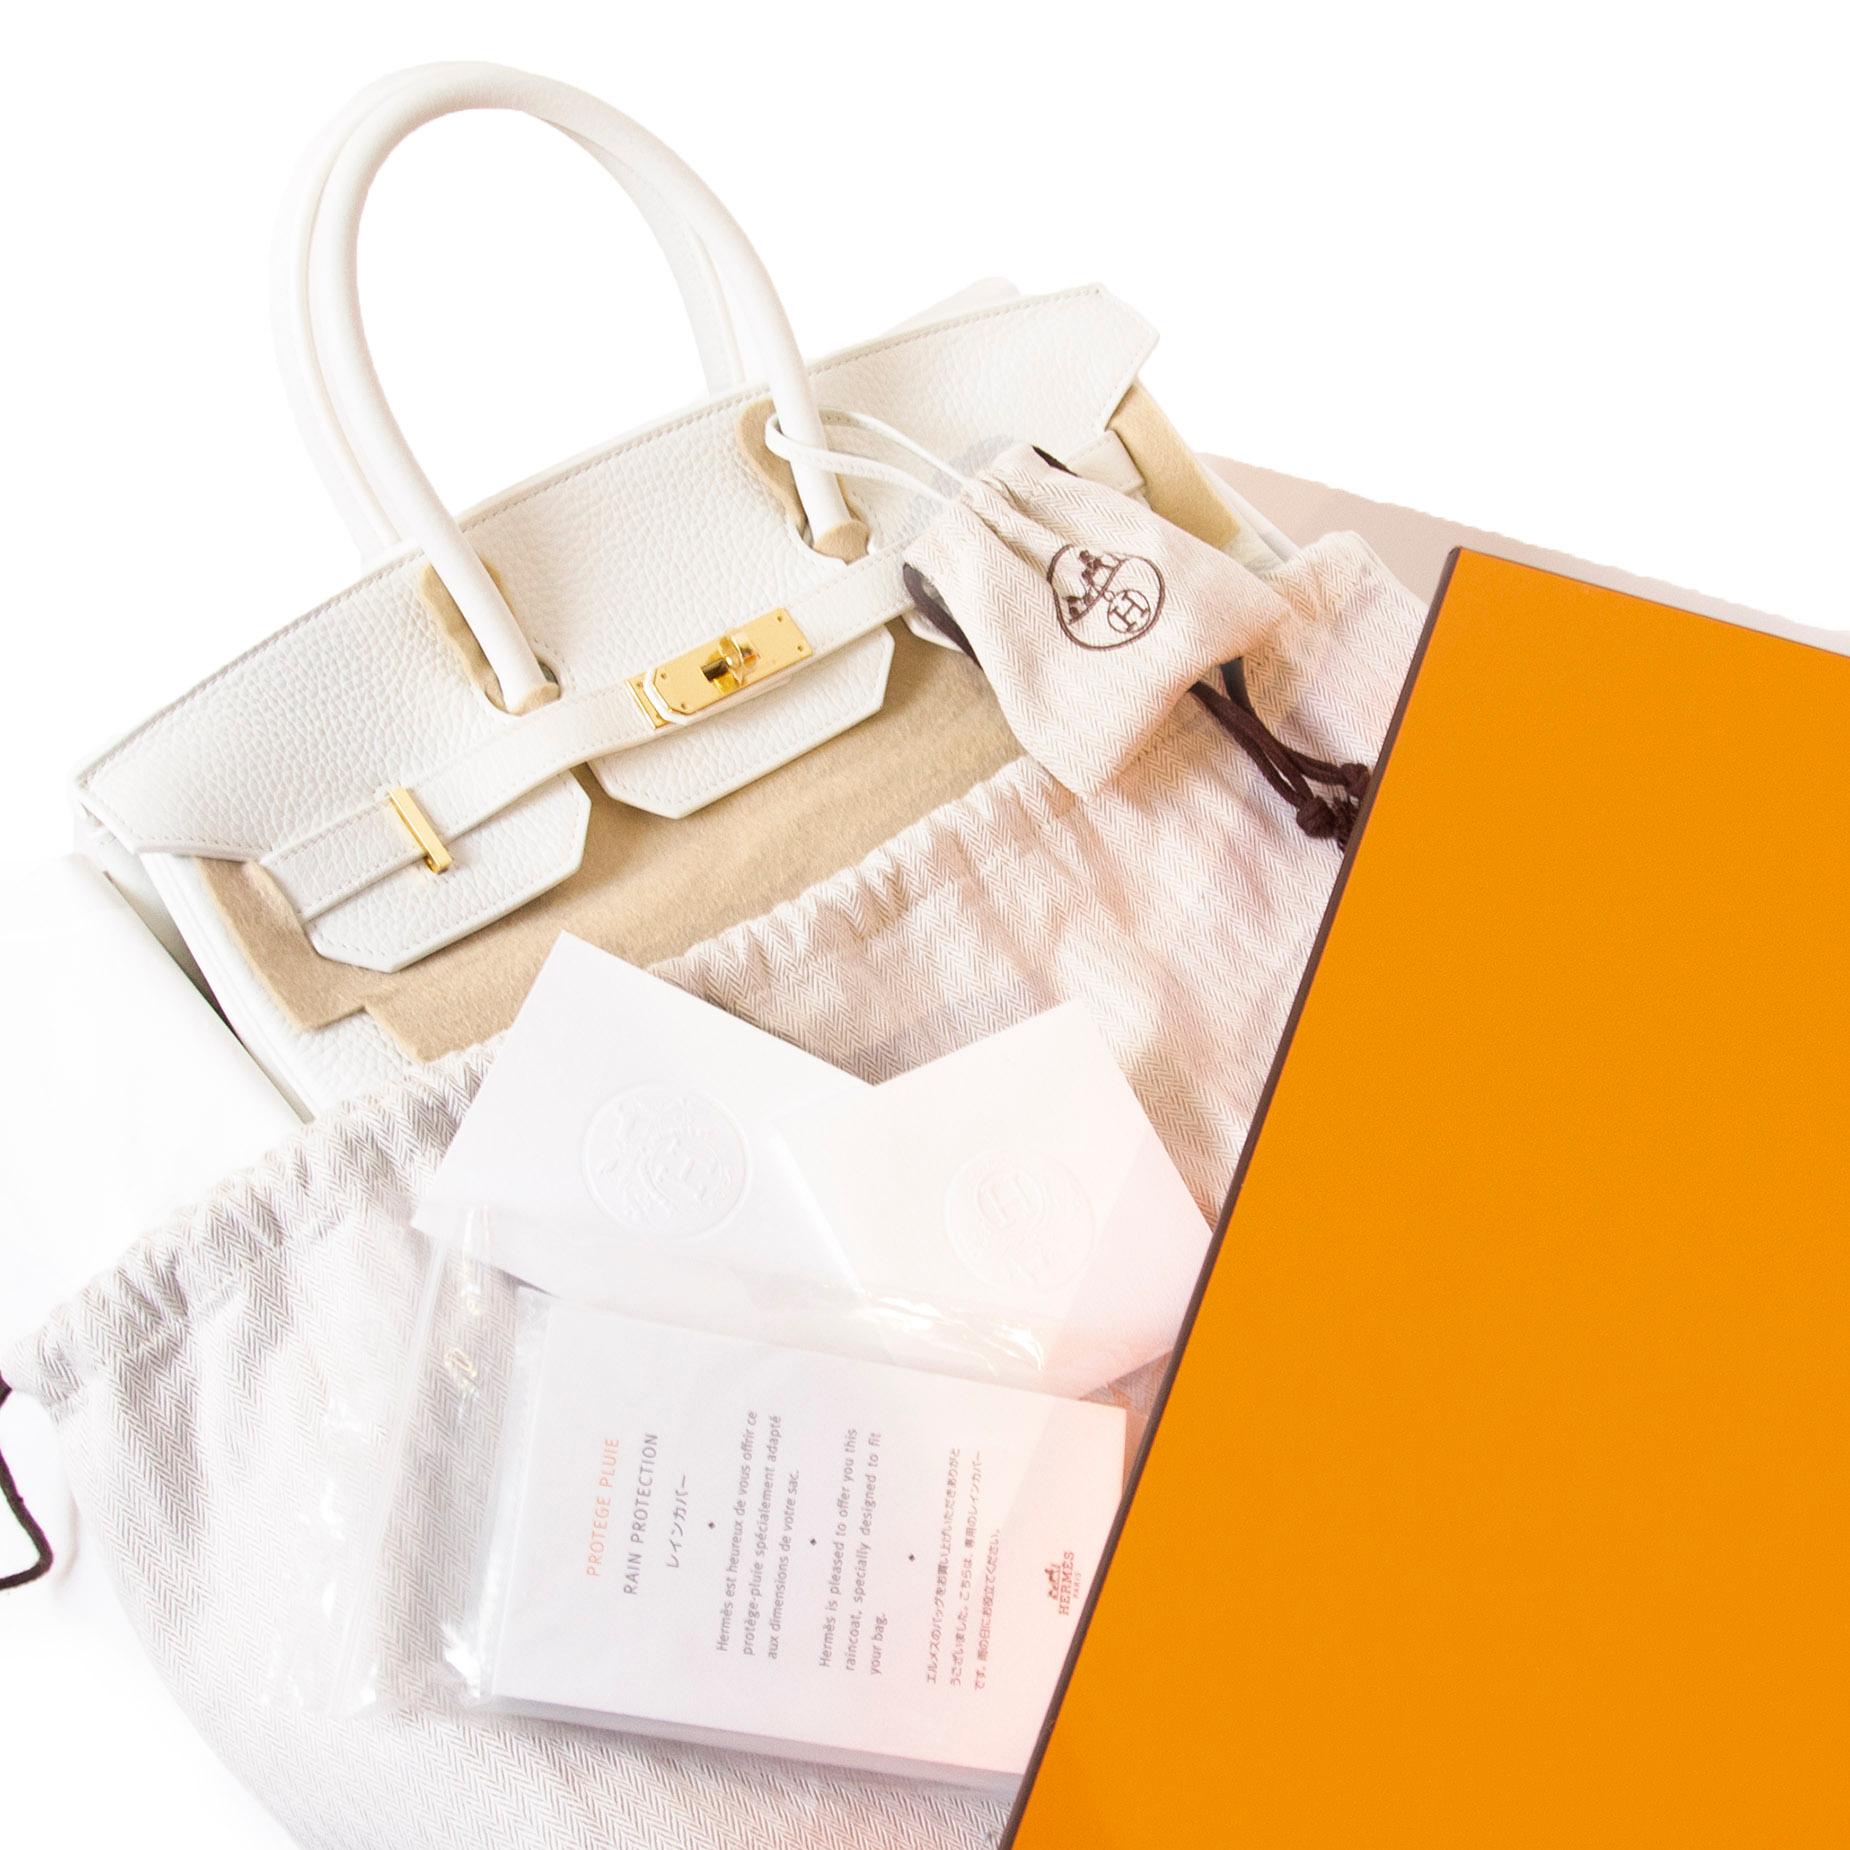 ermès Birkin 35 White Taurillon Clemence GHW. This is an extremely rare and sough-after combination of Birkin bag! The white taurillon clemence leather looks soft yet structured and pairs beautifully with the luxurious gold-toned hardware. 

Comes